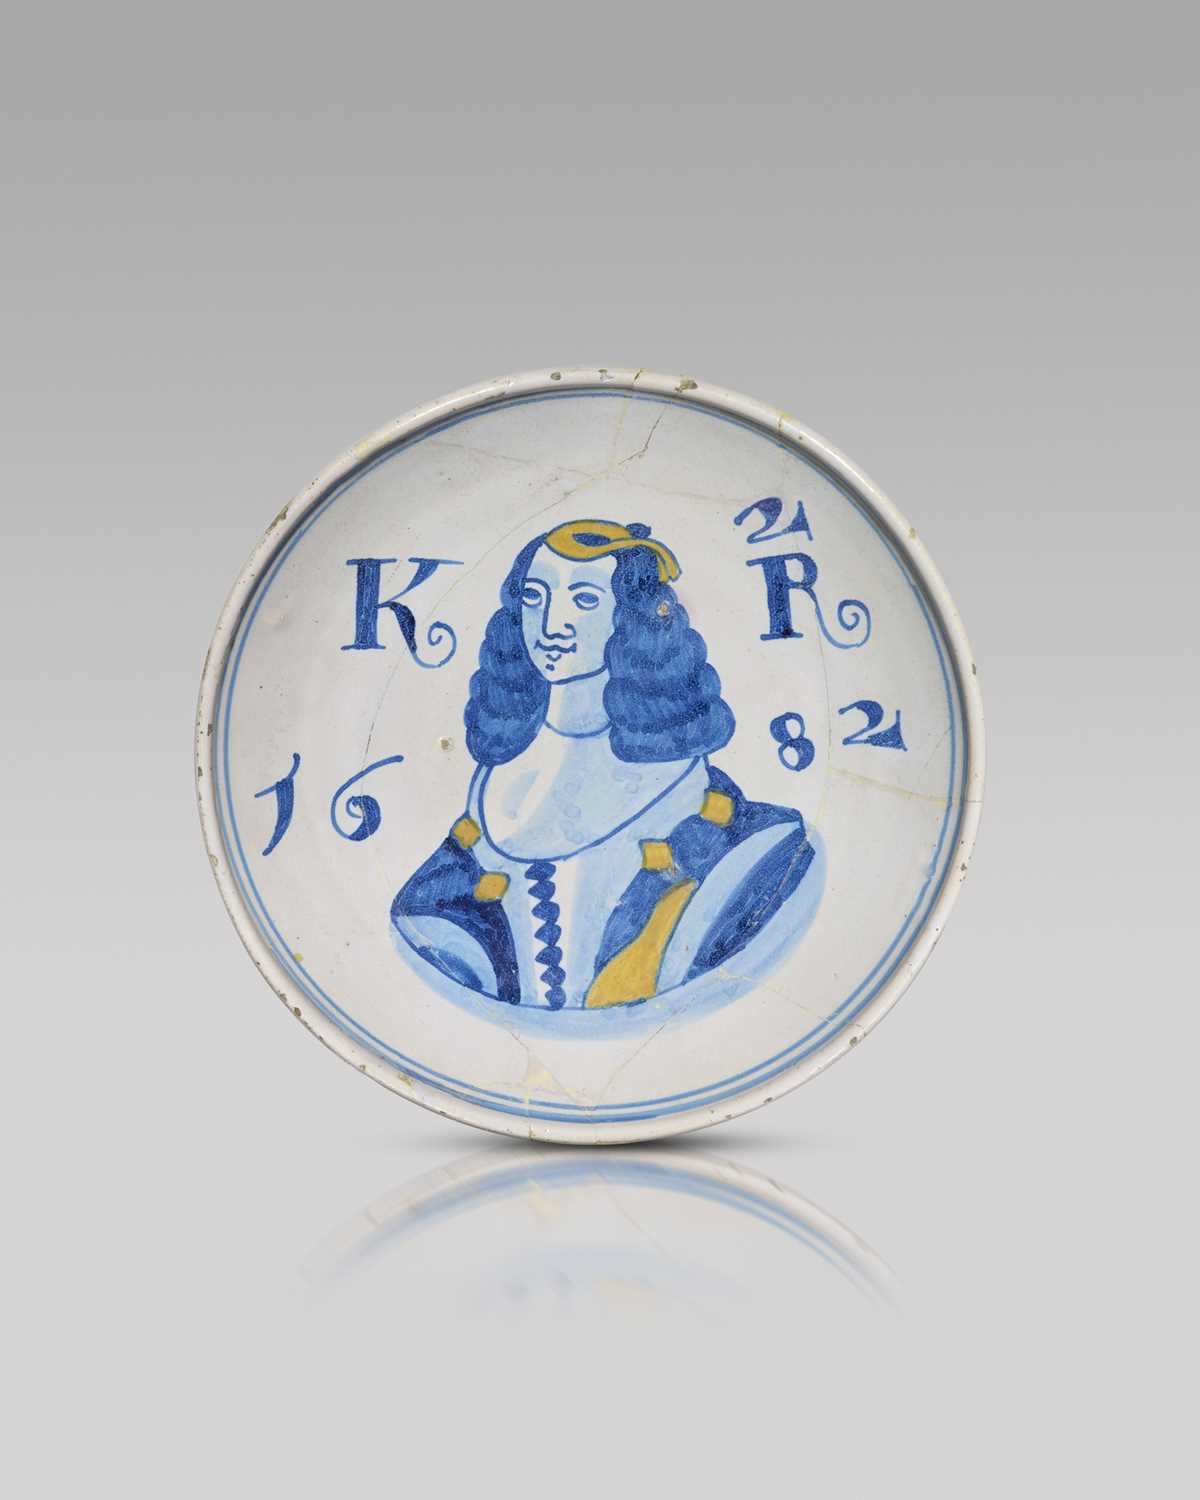 A rare delftware Royal dish, dated 1682, painted in blue and yellow with a portrait of Catherine